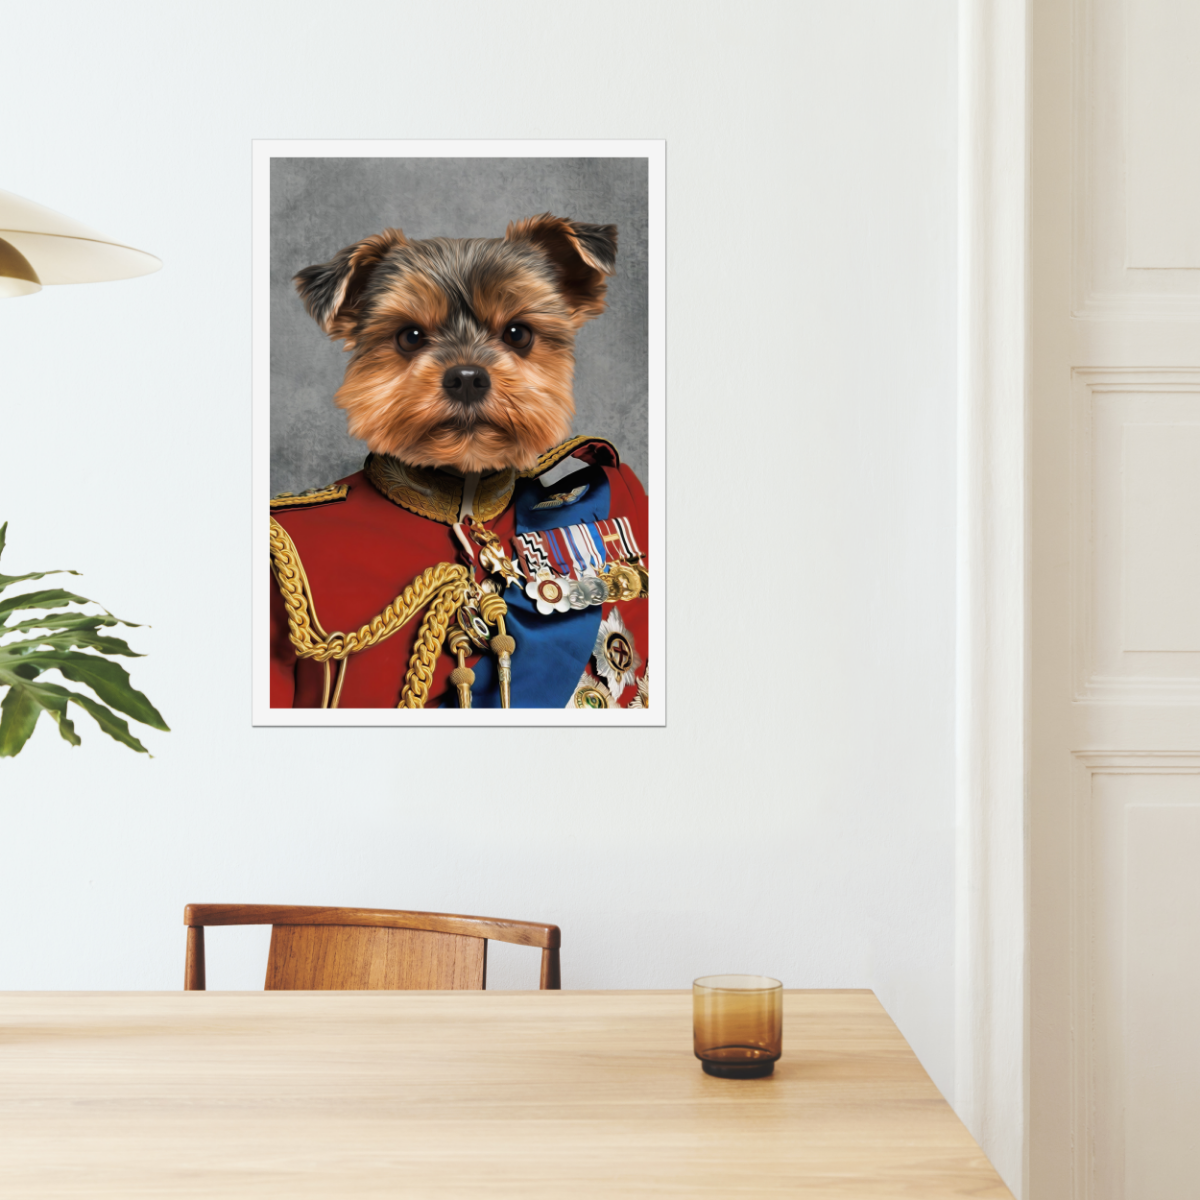 The Governor: Custom Pet Poster - Paw & Glory - #pet portraits# - #dog portraits# - #pet portraits uk#Paw & Glory, paw and glory, custom painting dog pet paintings in costume turner & walker, pet portraits from photos prices uk dog paintings personalised cat canvas pet portrait